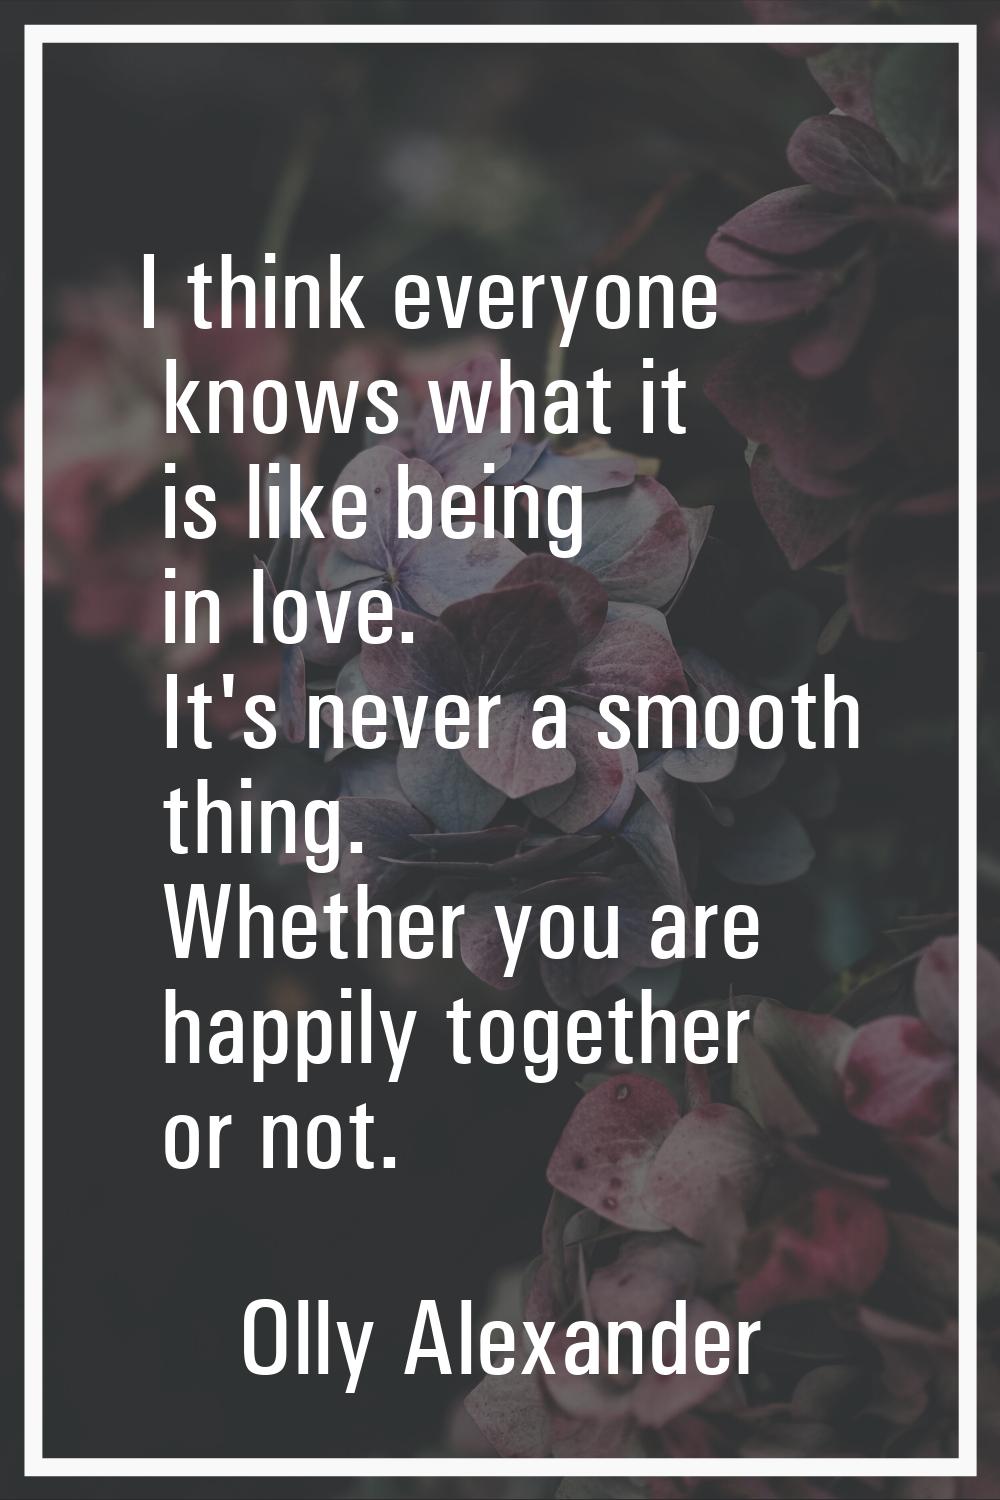 I think everyone knows what it is like being in love. It's never a smooth thing. Whether you are ha